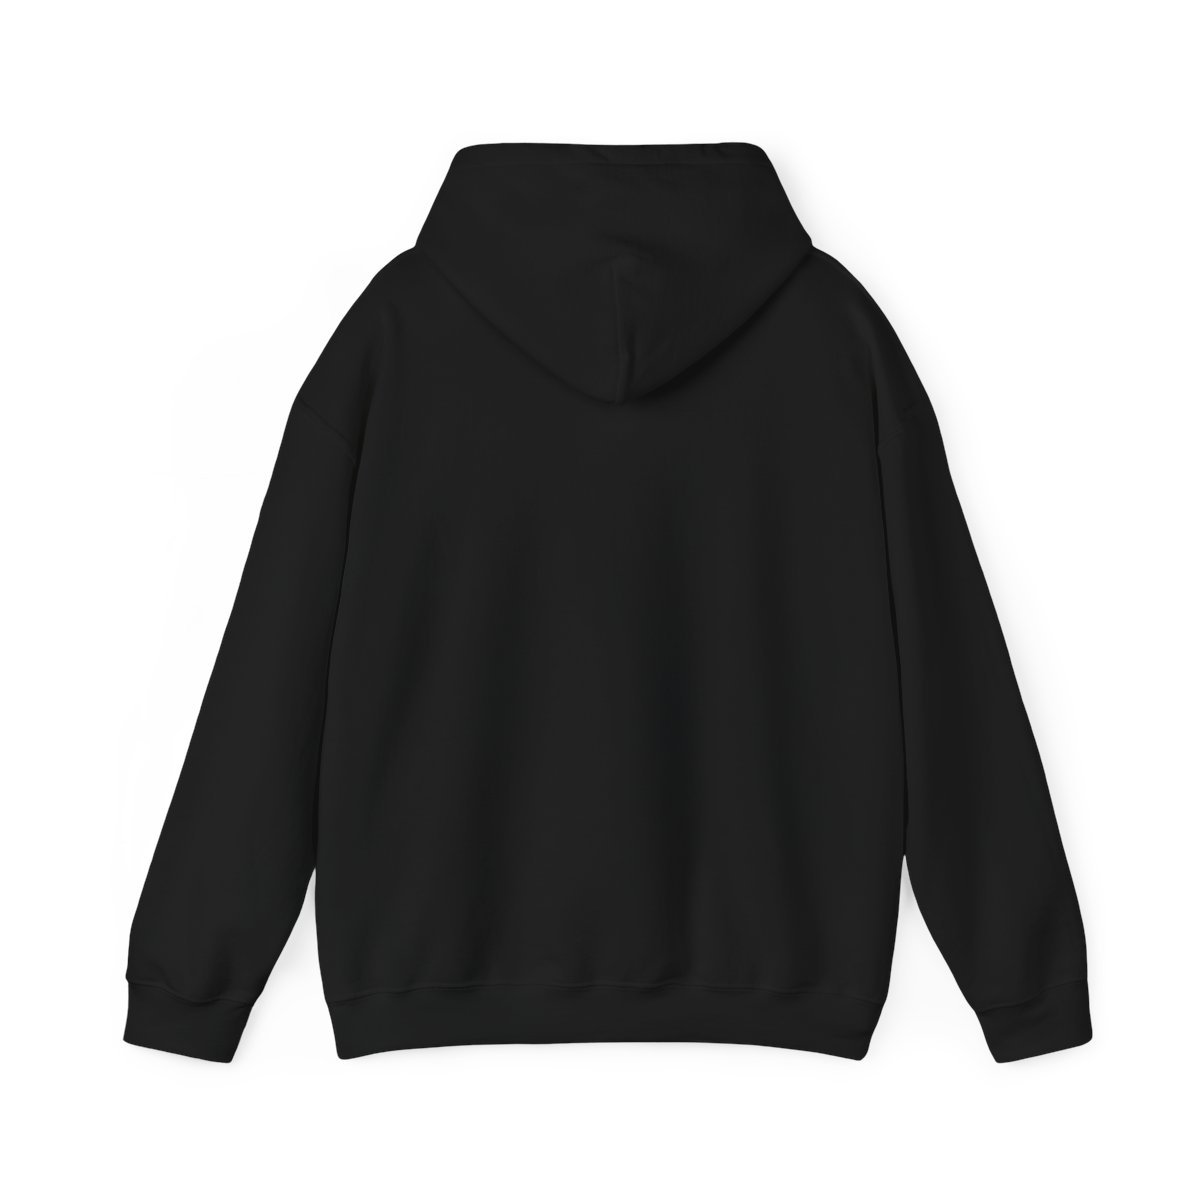 BrowBeat – Wither Wing Pullover Hooded Sweatshirt